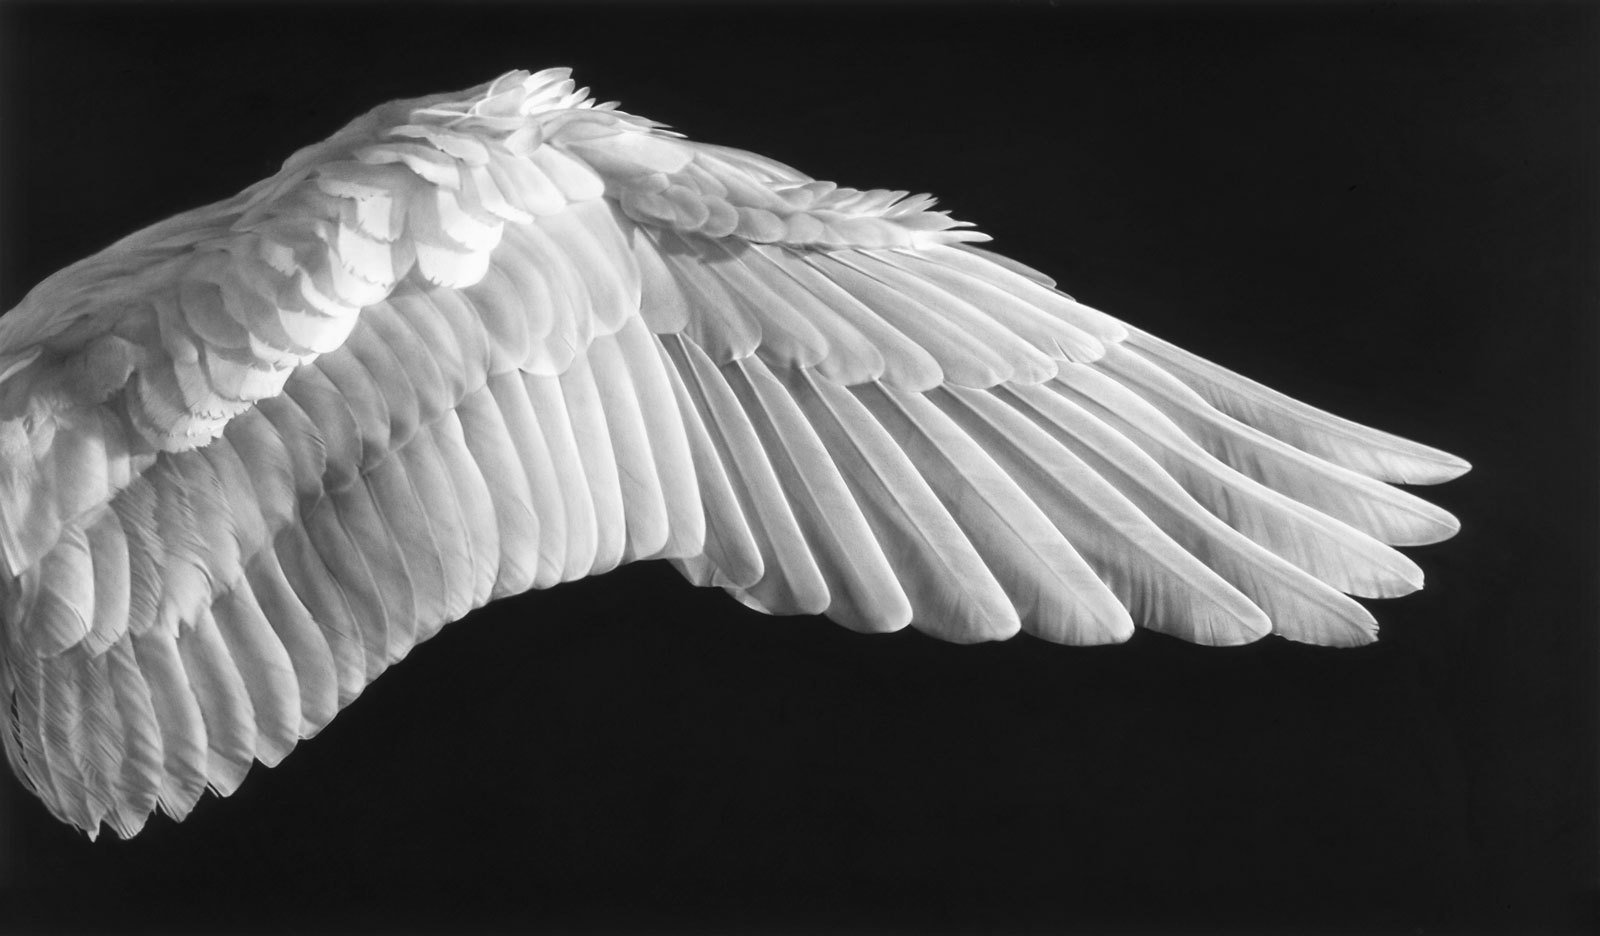 Untitled (Gabriel's Wing), 2015.&nbsp;Charcoal on mounted paper, 70 x 120&nbsp;inches (177.8 x 304.8 cm).&nbsp;Courtesy of&nbsp;the artist and Metro Pictures, New York.